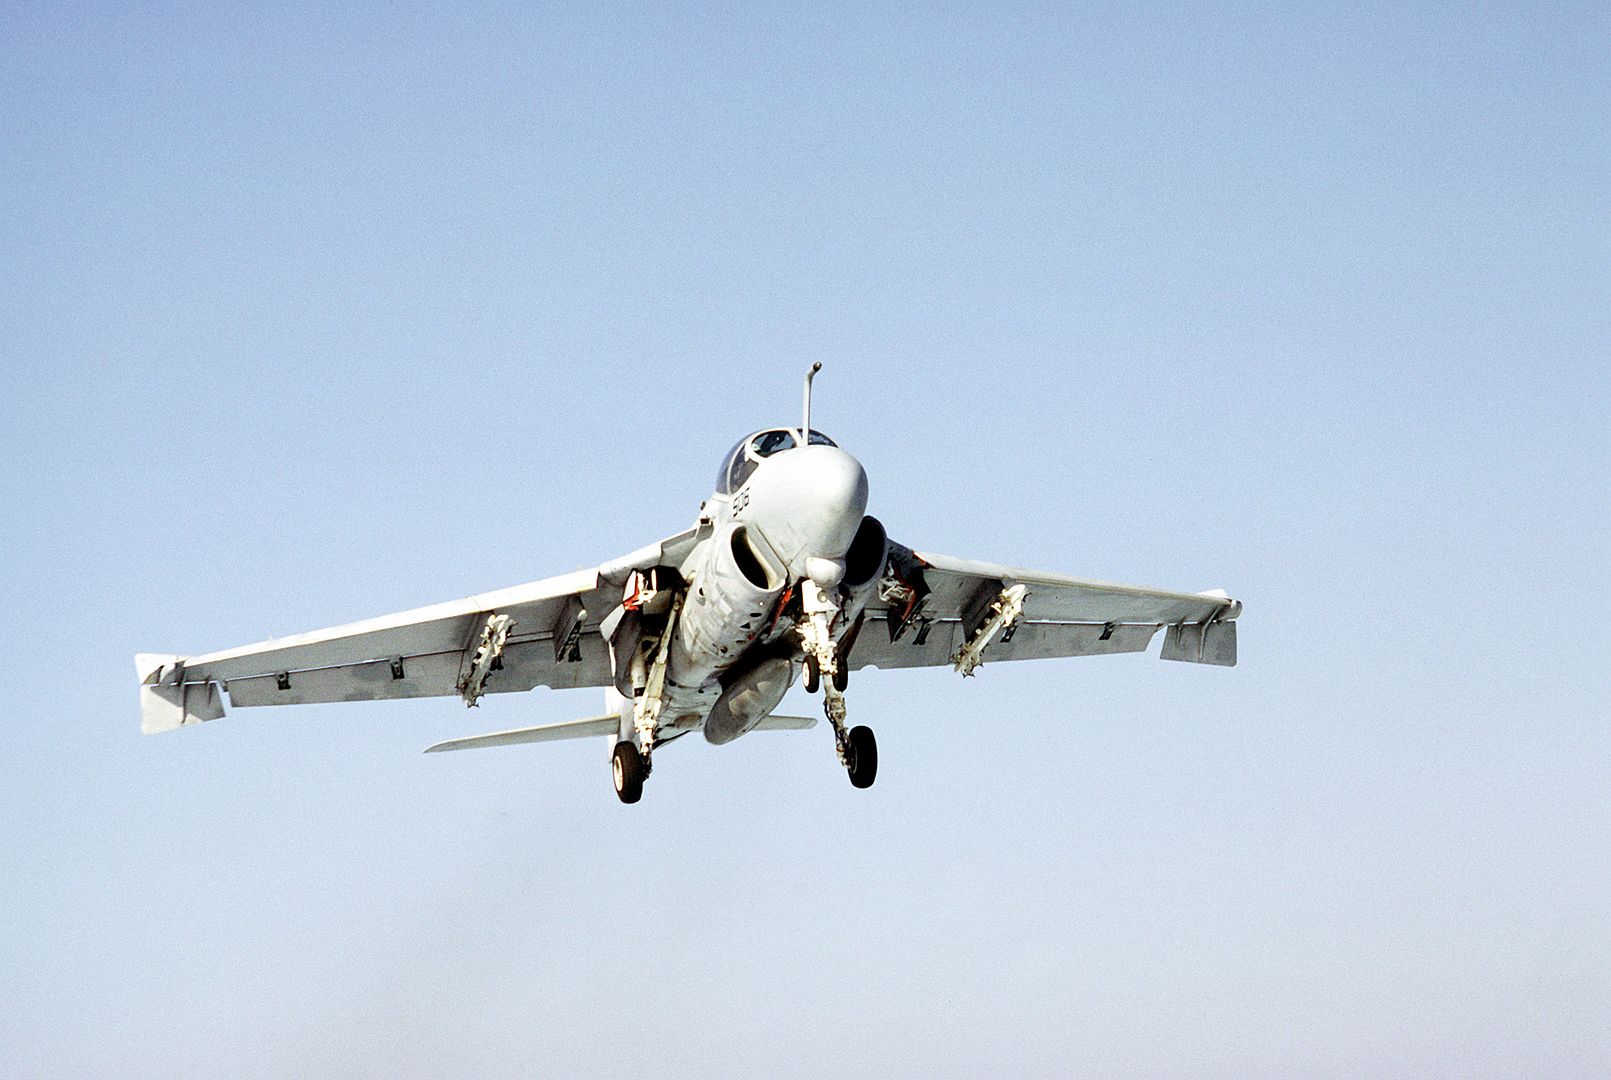 A Front View Of An A 6E Intruder Aircraft With Its Landing Gear Down